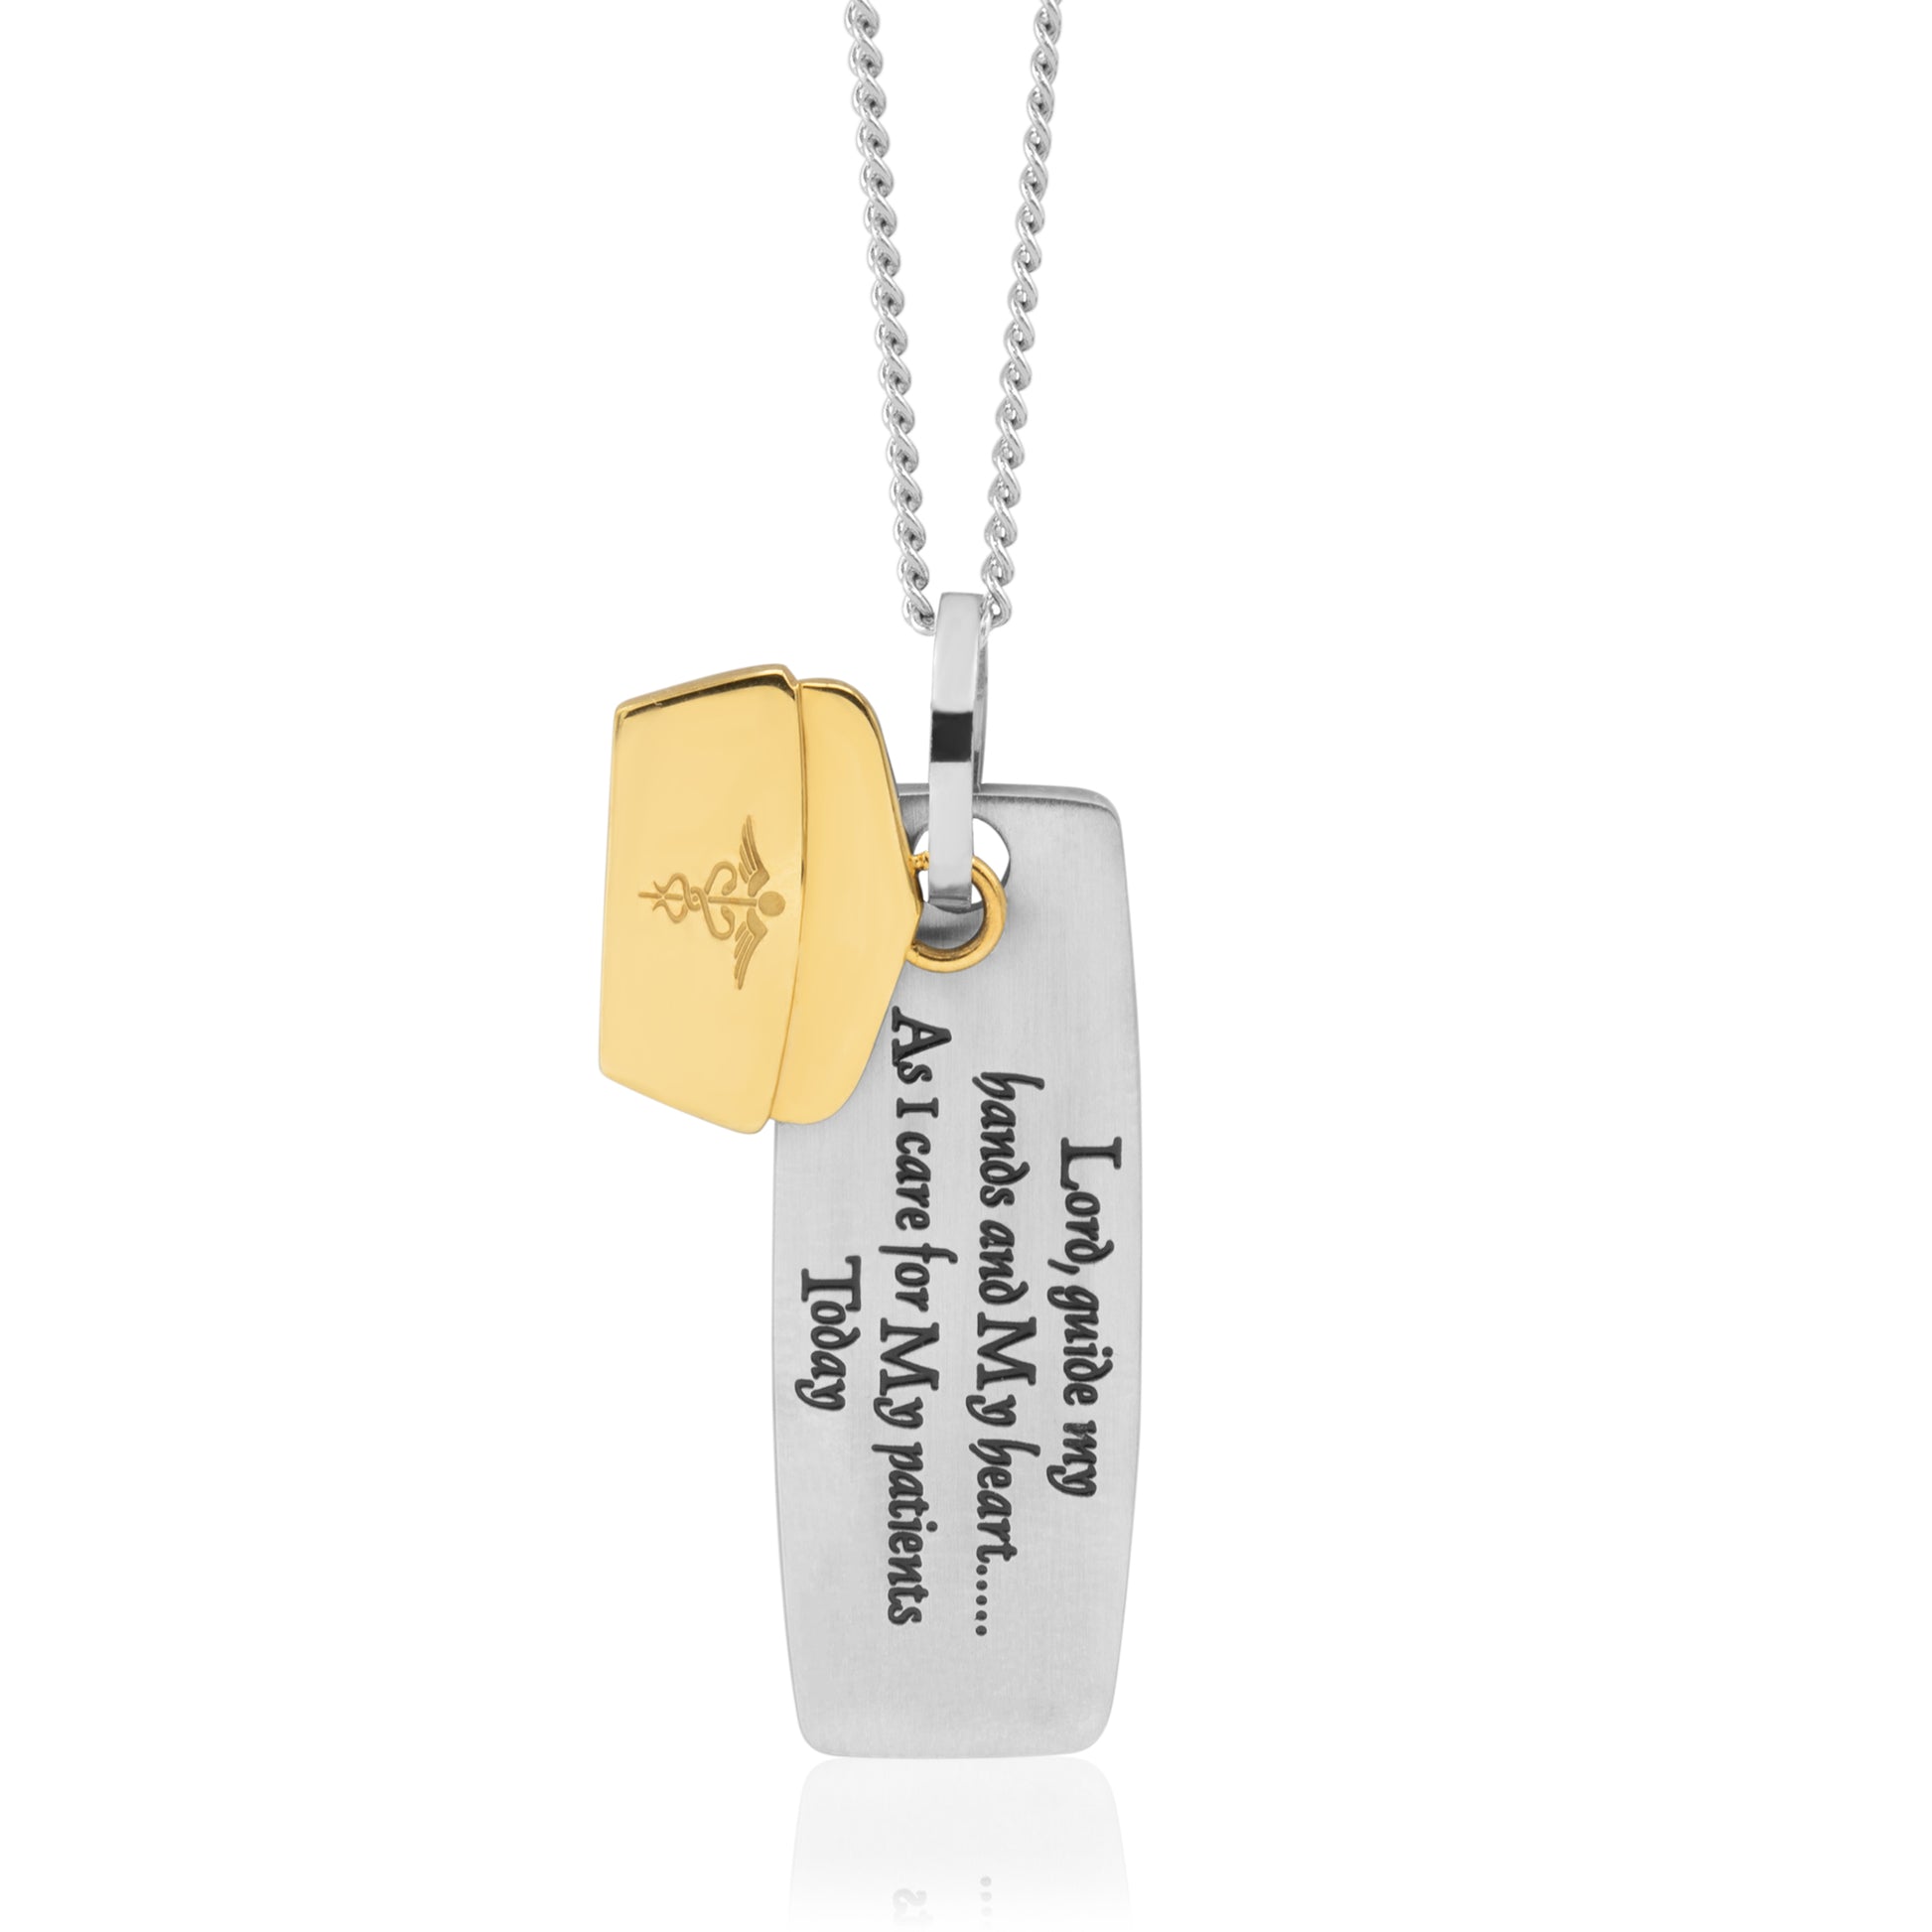 Engraved Stainless Steel Nurse's Prayer Pendant Necklace with Gold IP Plated Charm